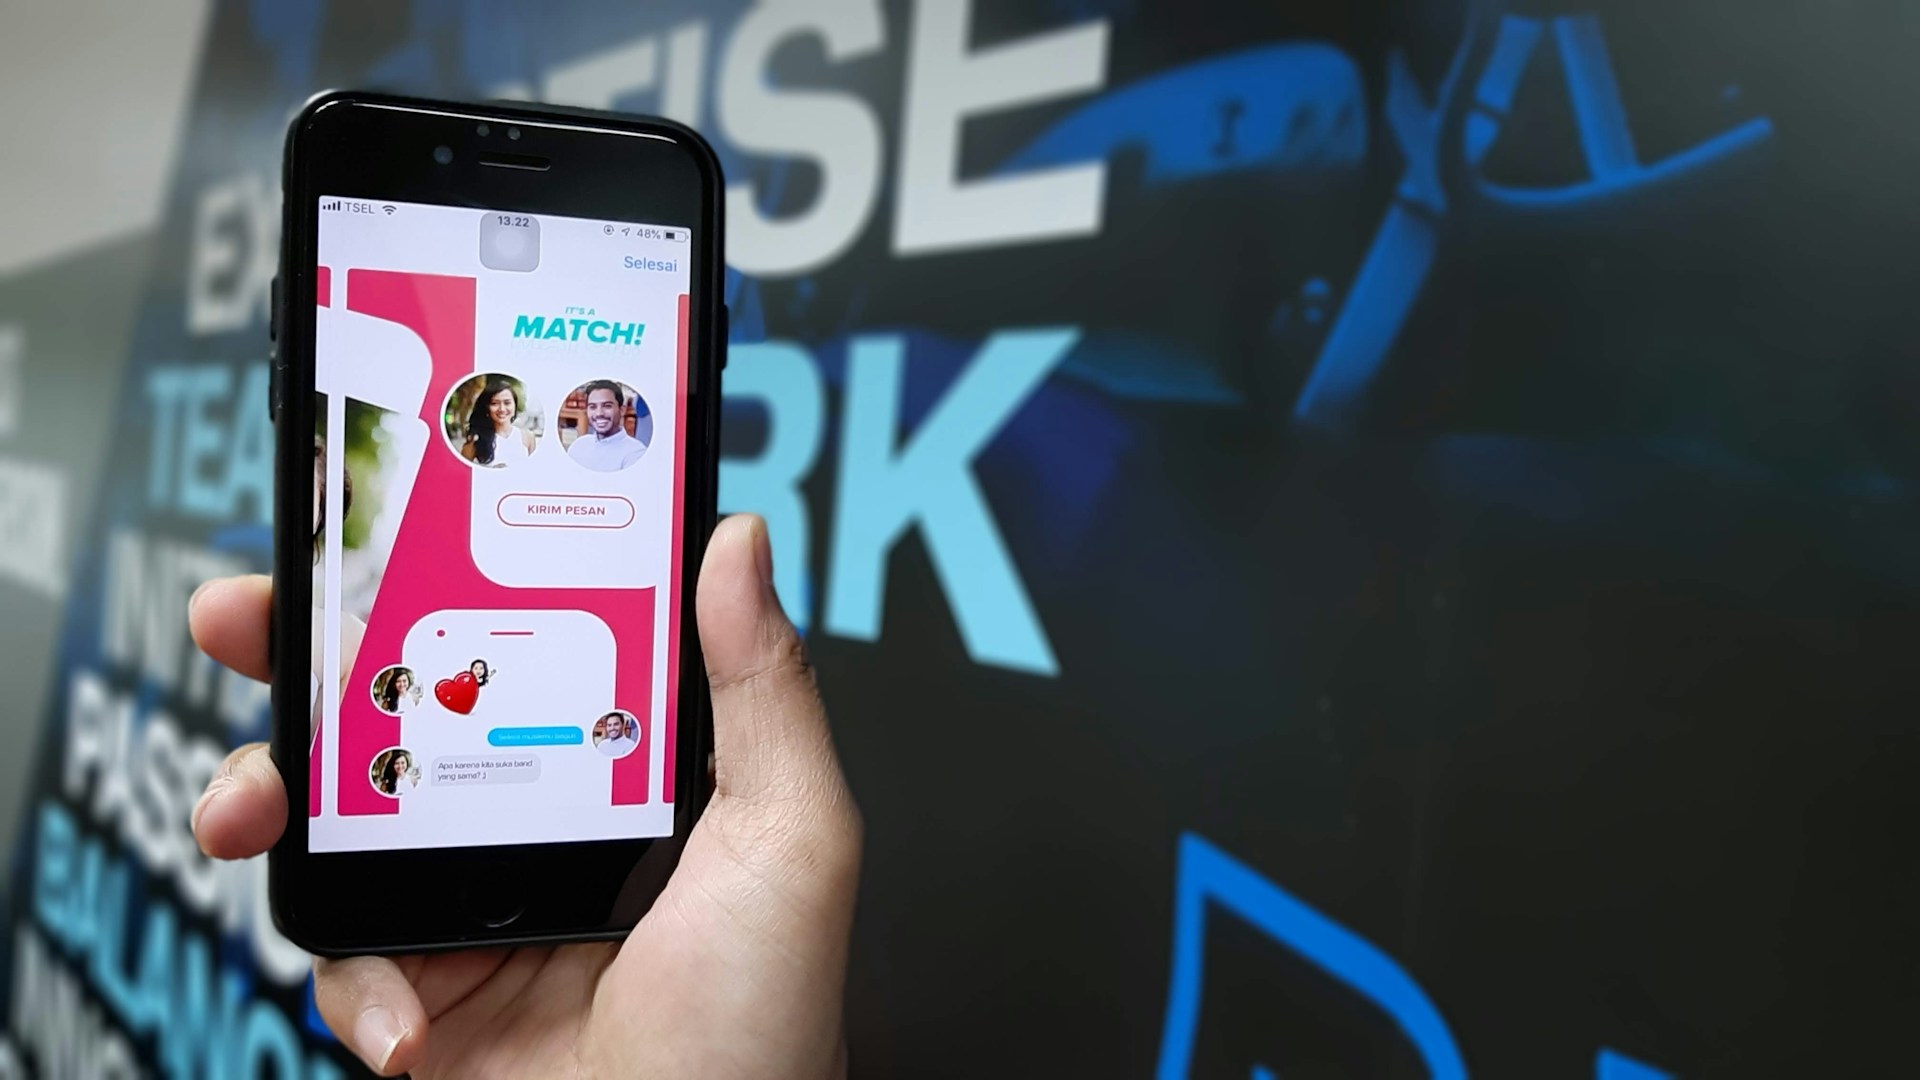 Tinder Unveils ‘Share My Date’ to Share Match Details with Closer Circle